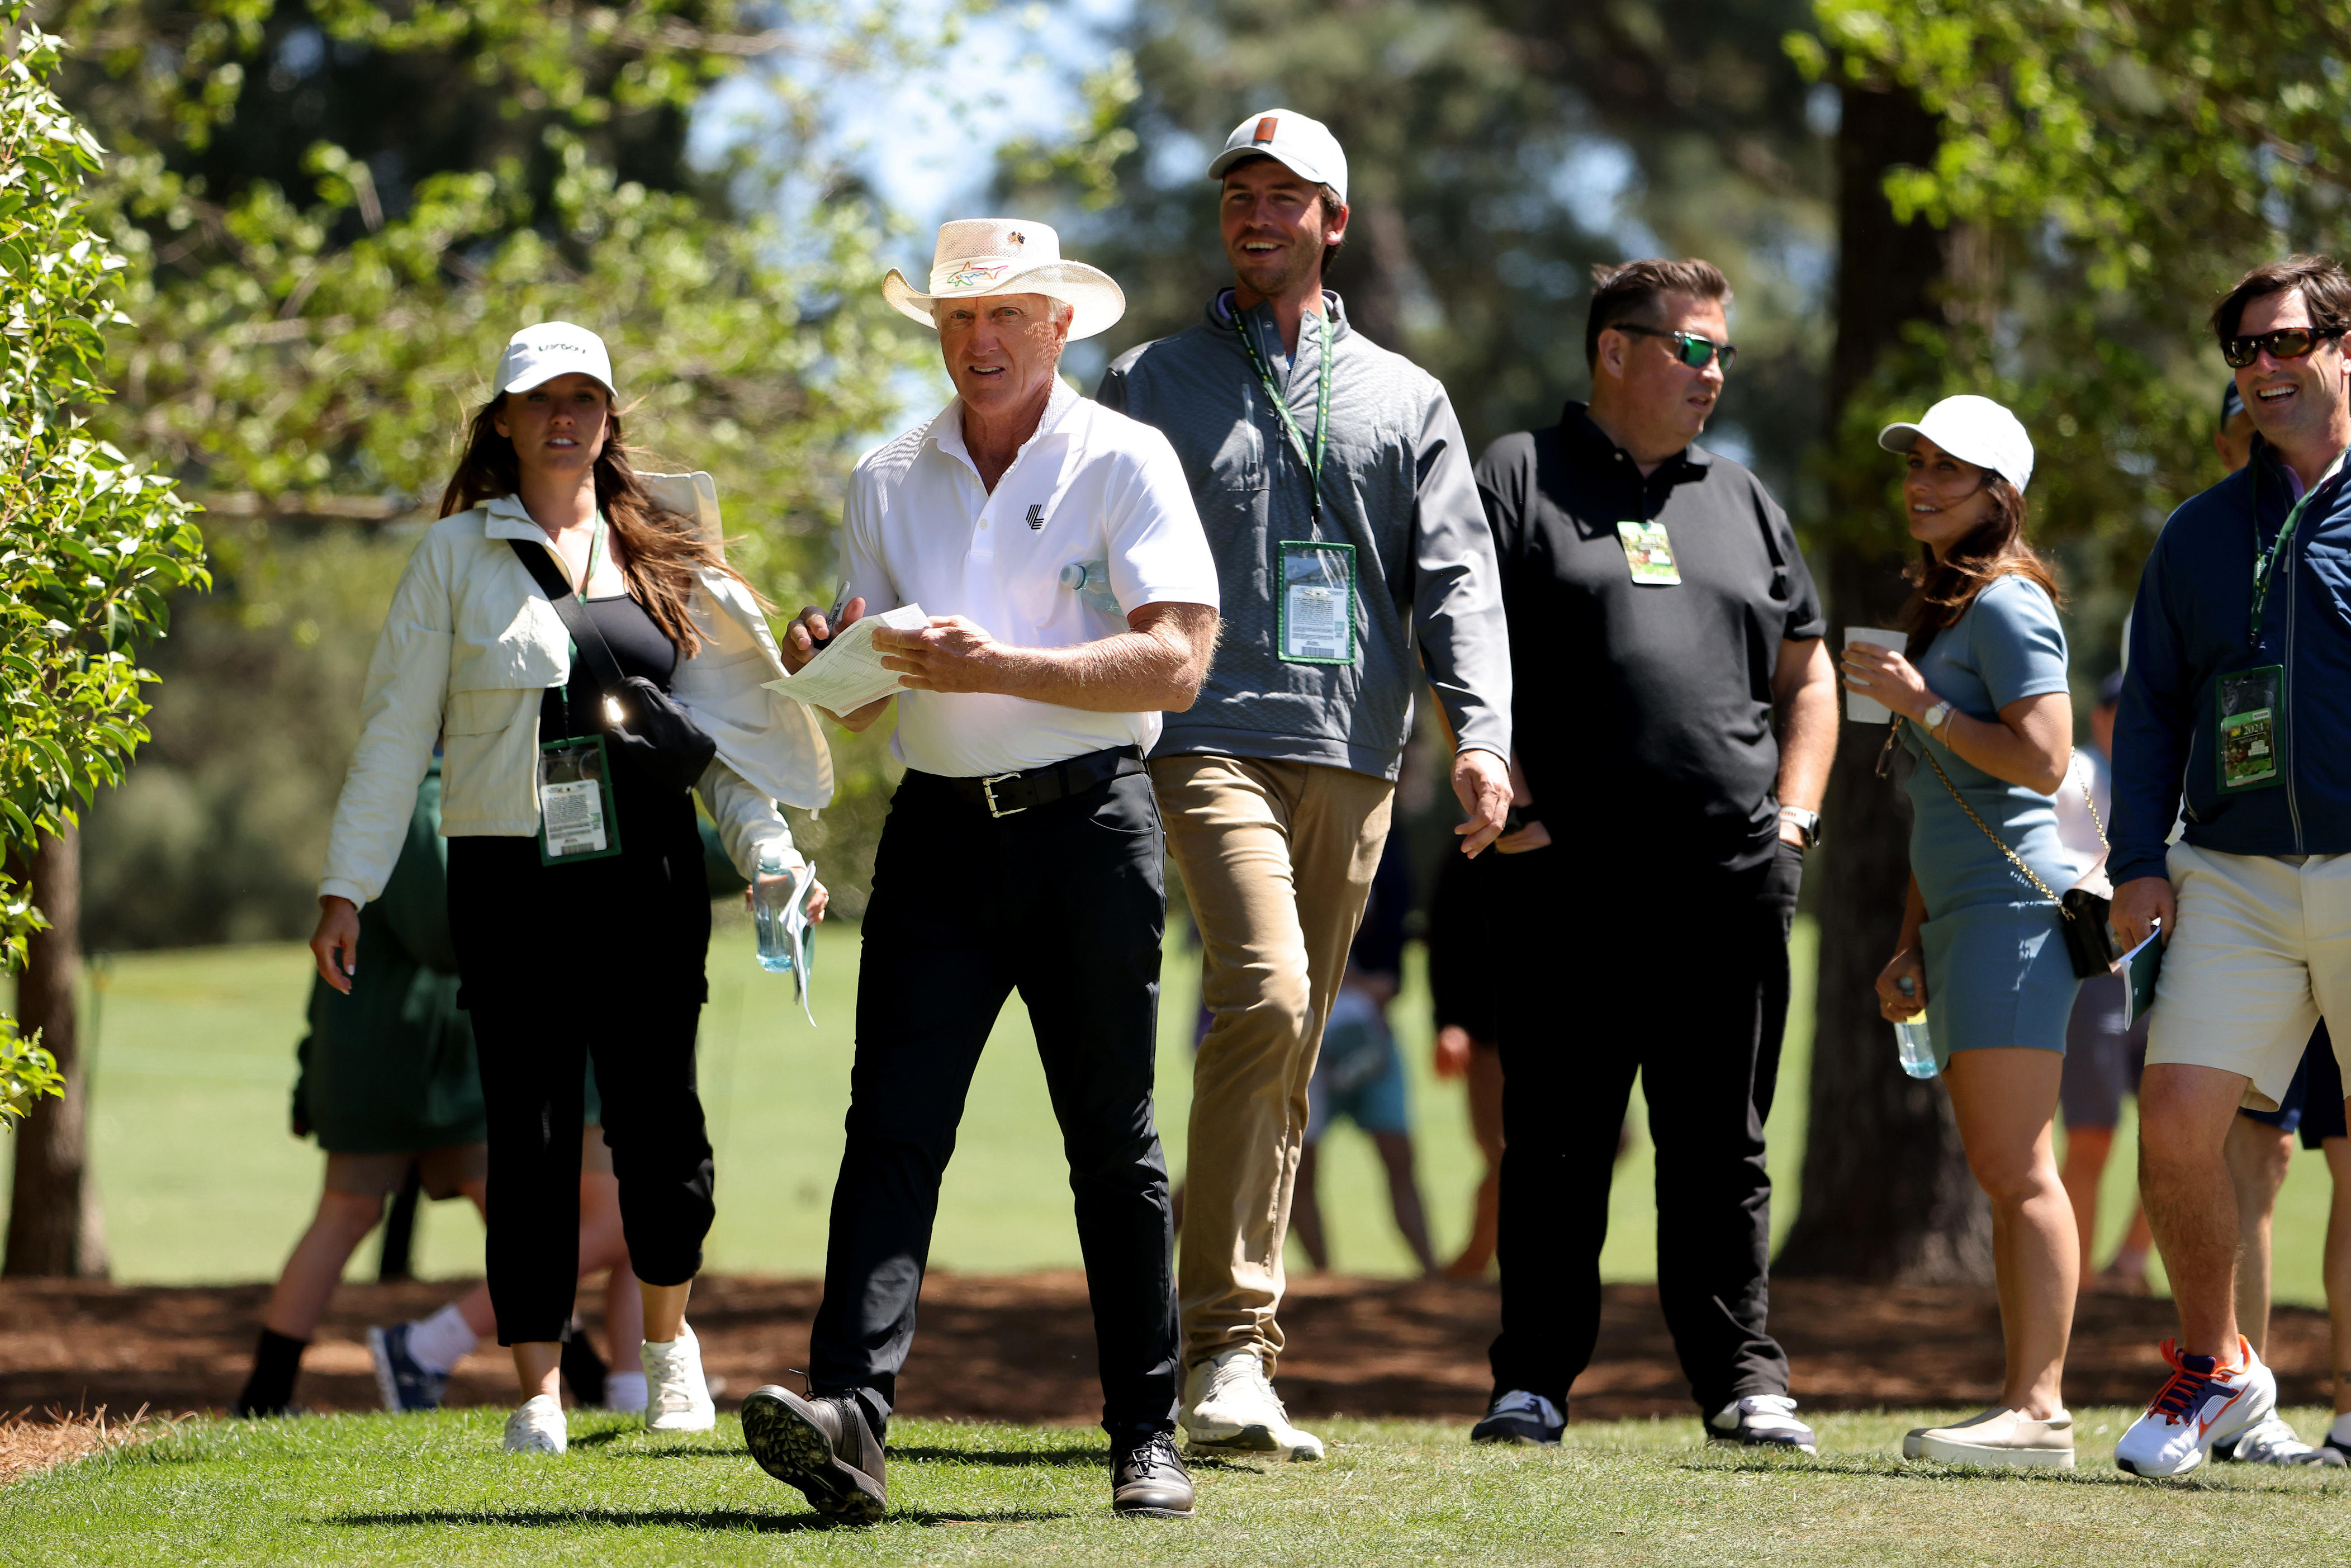 lynch: if only the masters awarded green jackets to trolls, greg norman would finally win at augusta national